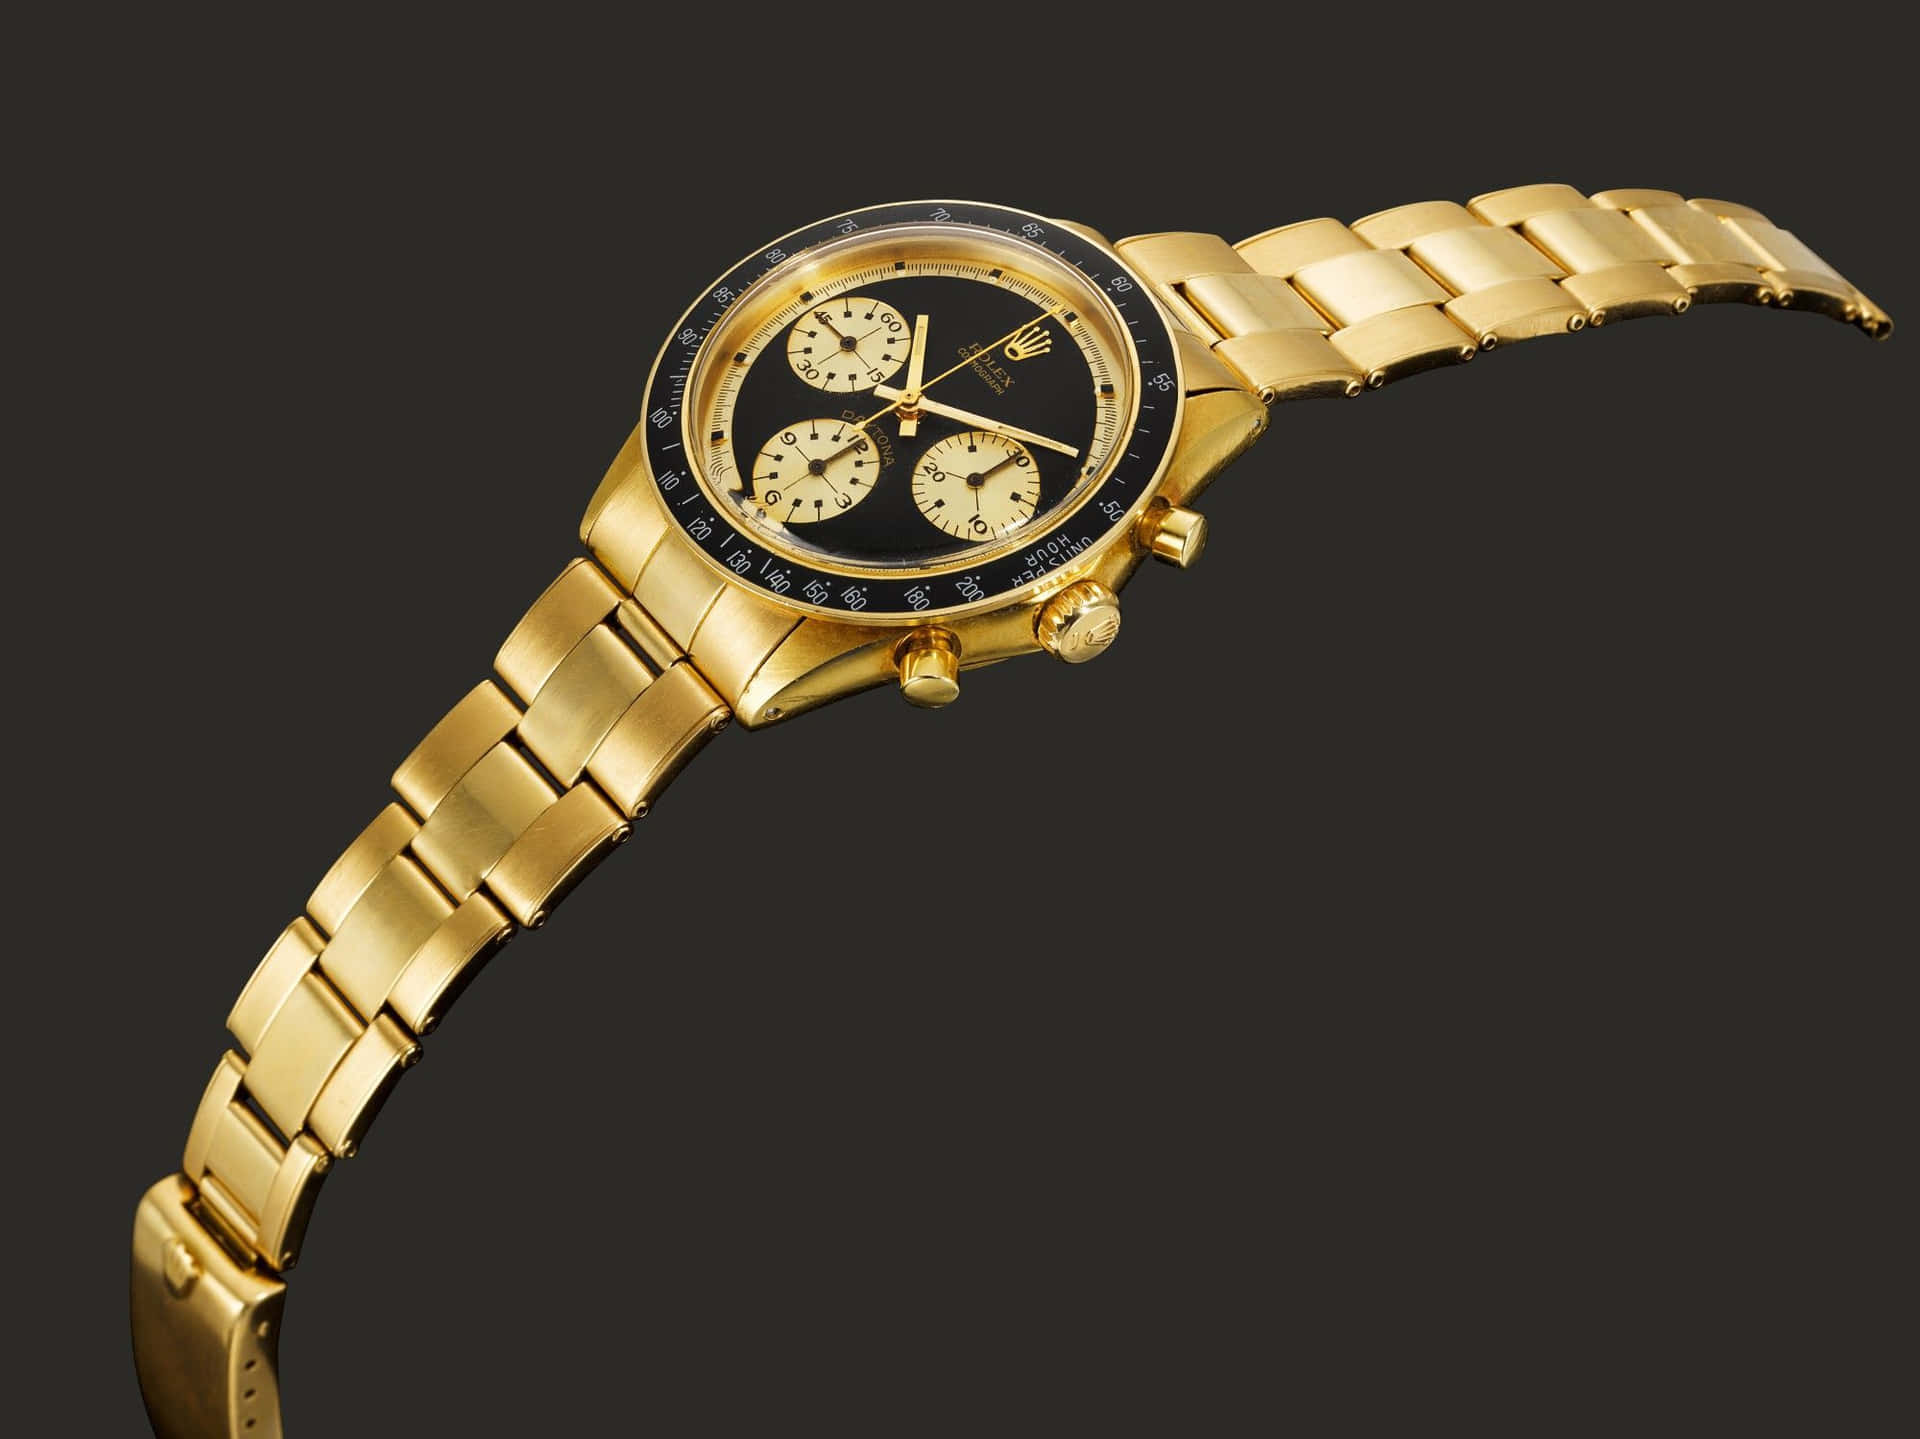 A Gold Watch With Black Dials On A Black Background